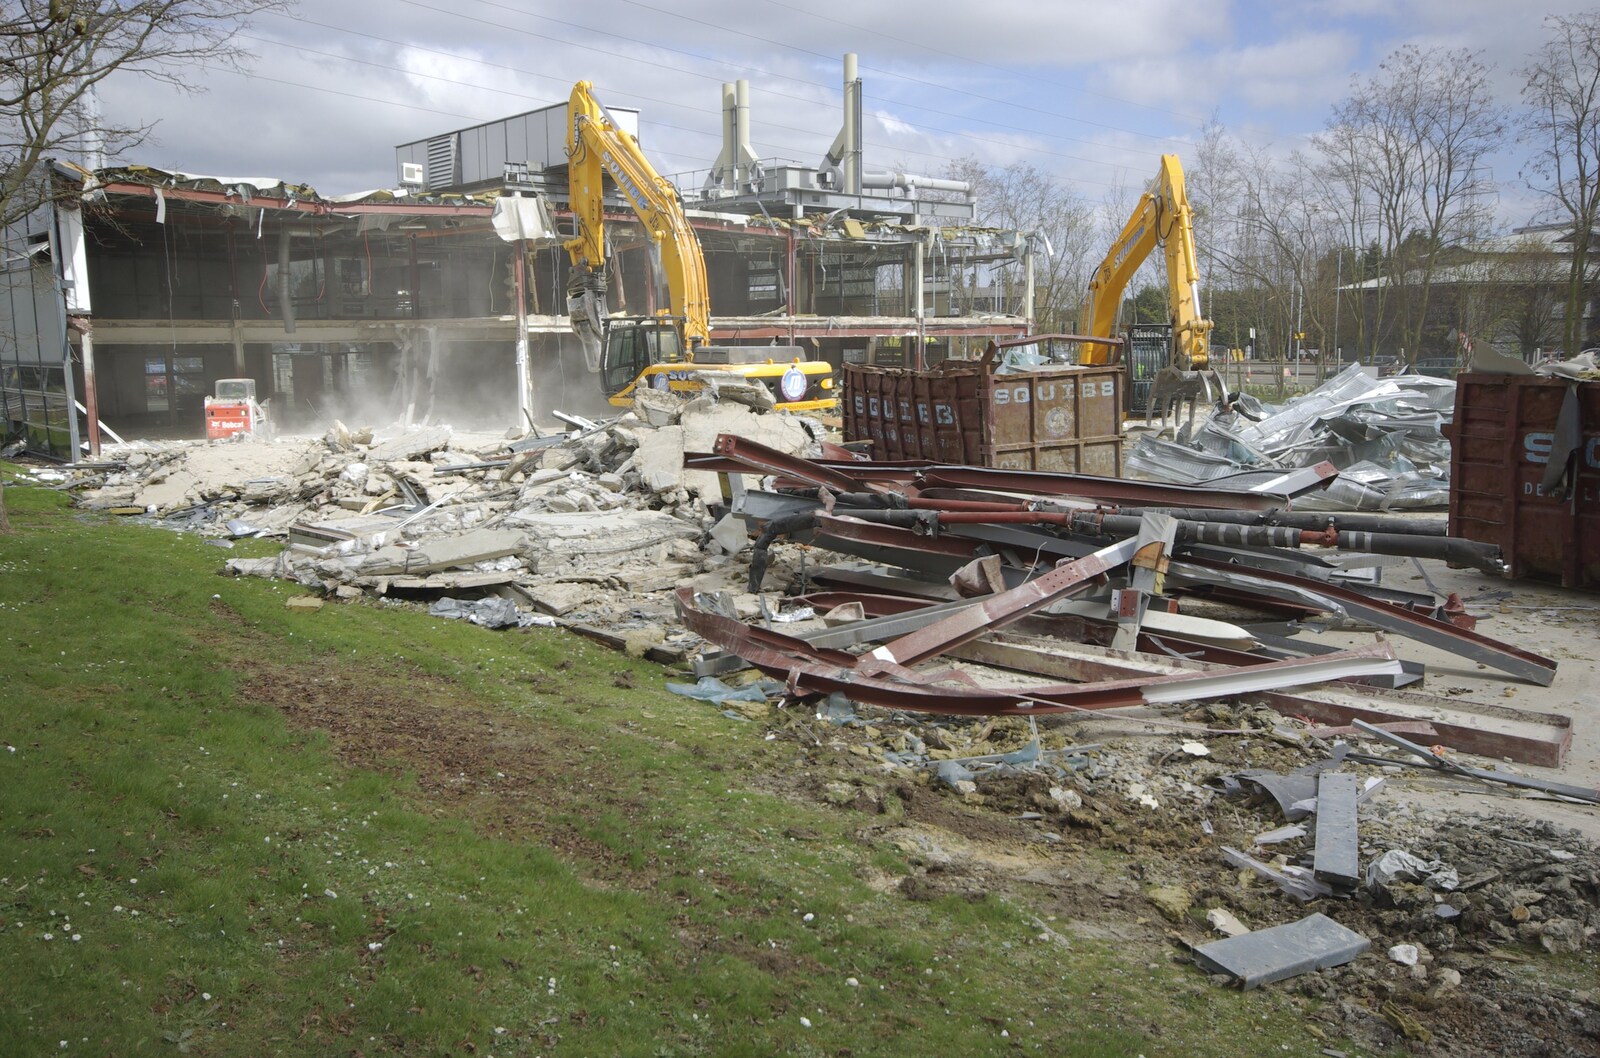 Two diggers in action from Science Park Demolition, Bjarne Stroustrup, and Taptu/Qualcomm Miscellany, Cambridge - 29th April 2007